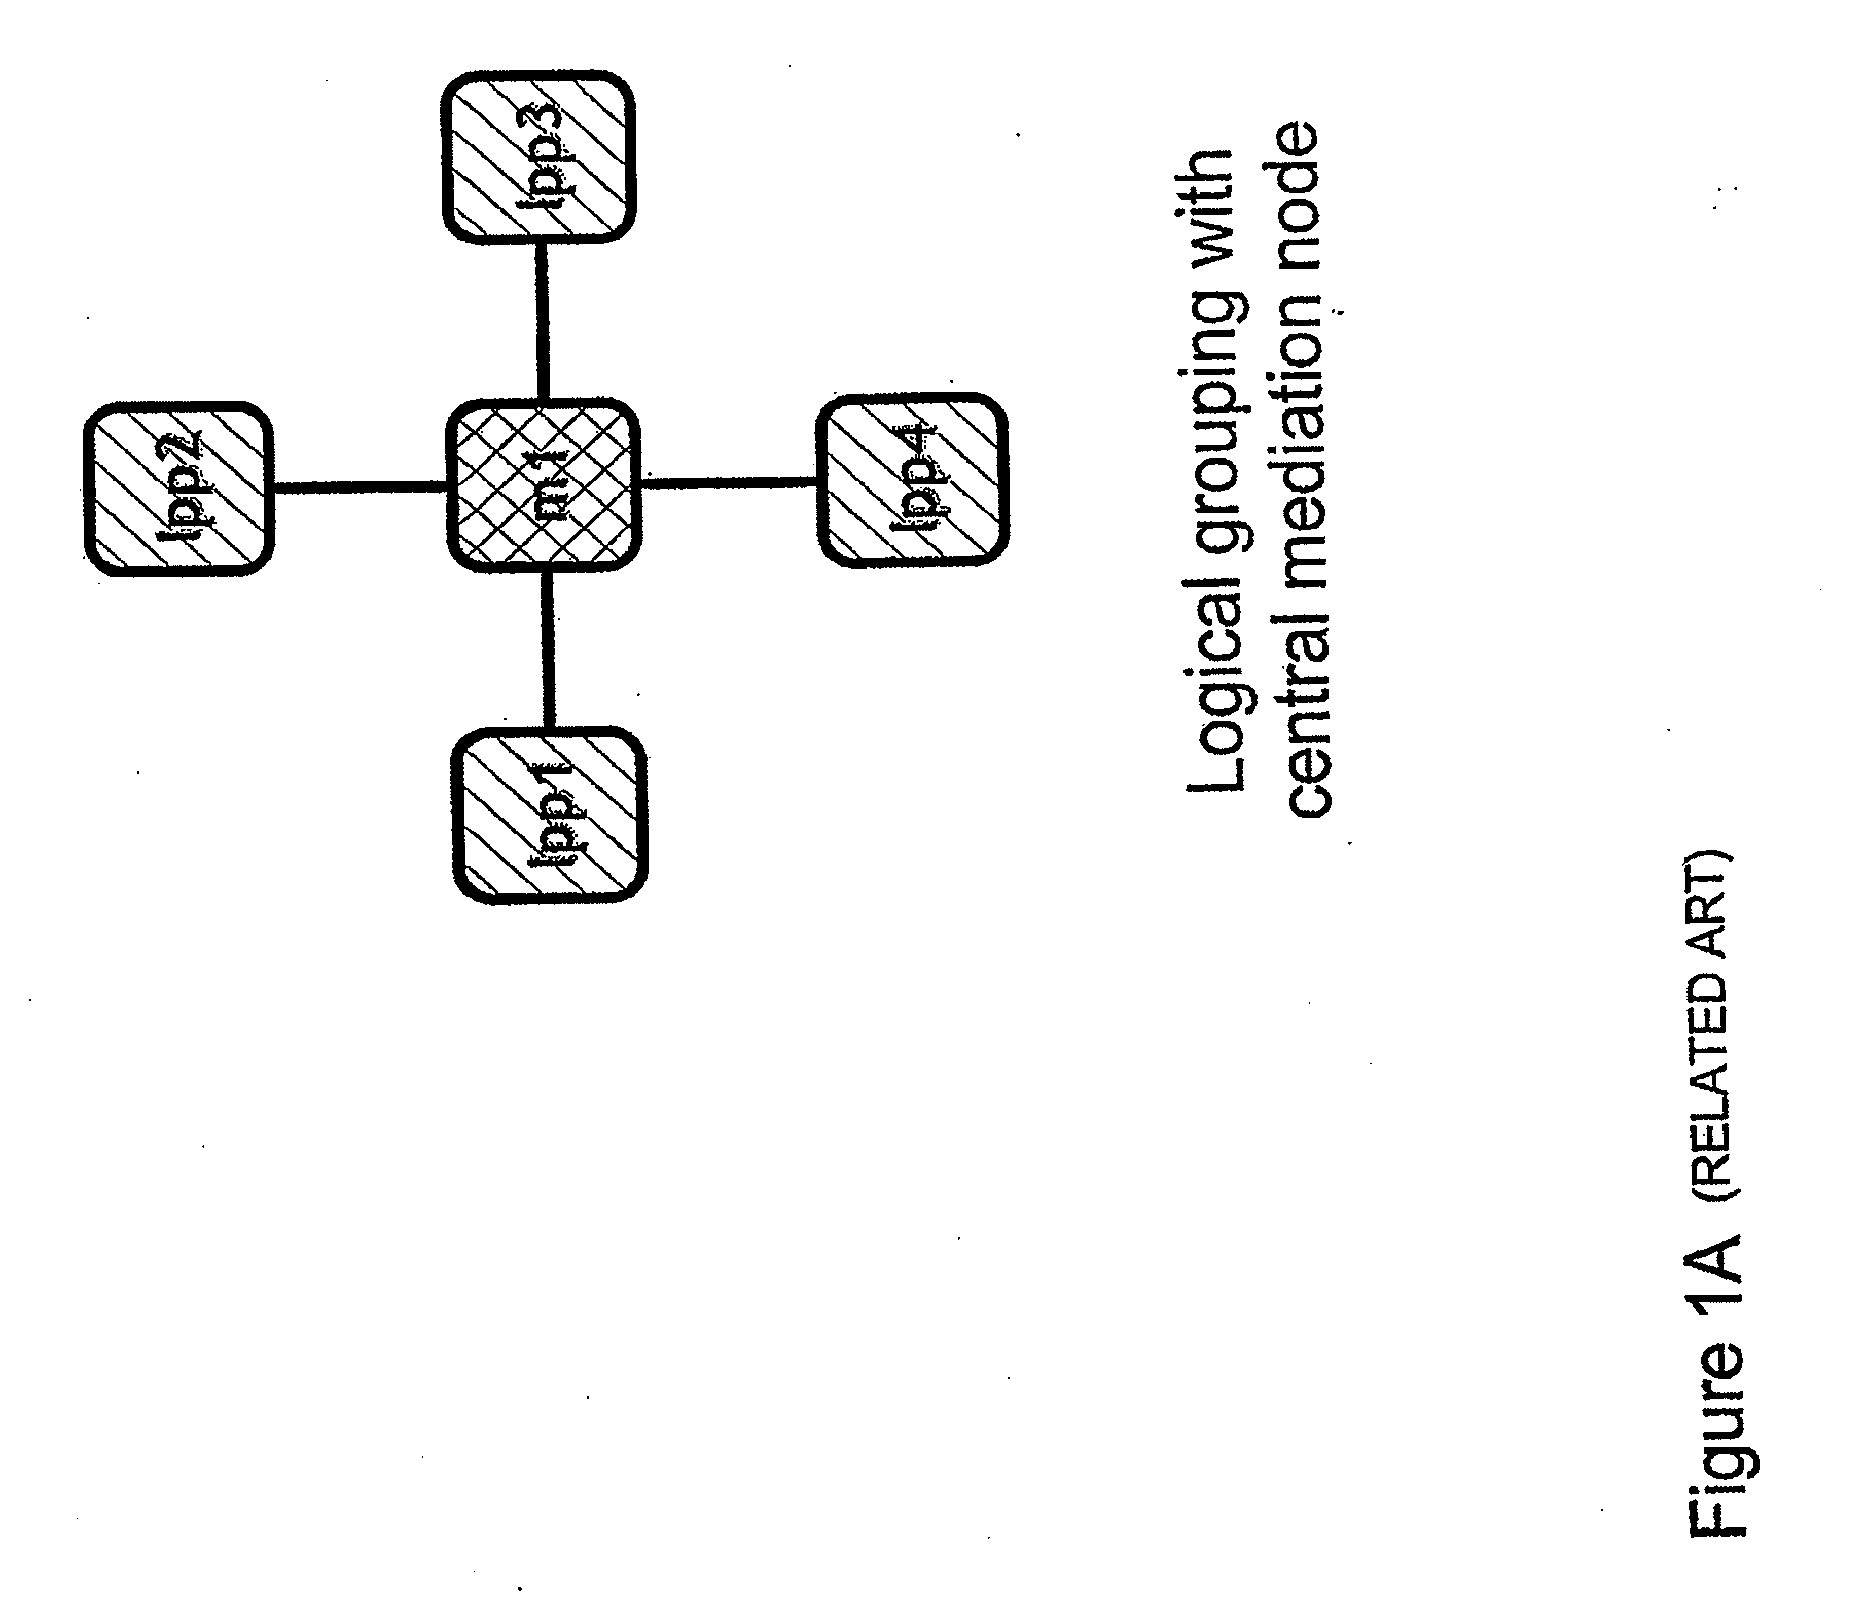 Self-managed distributed mediation networks